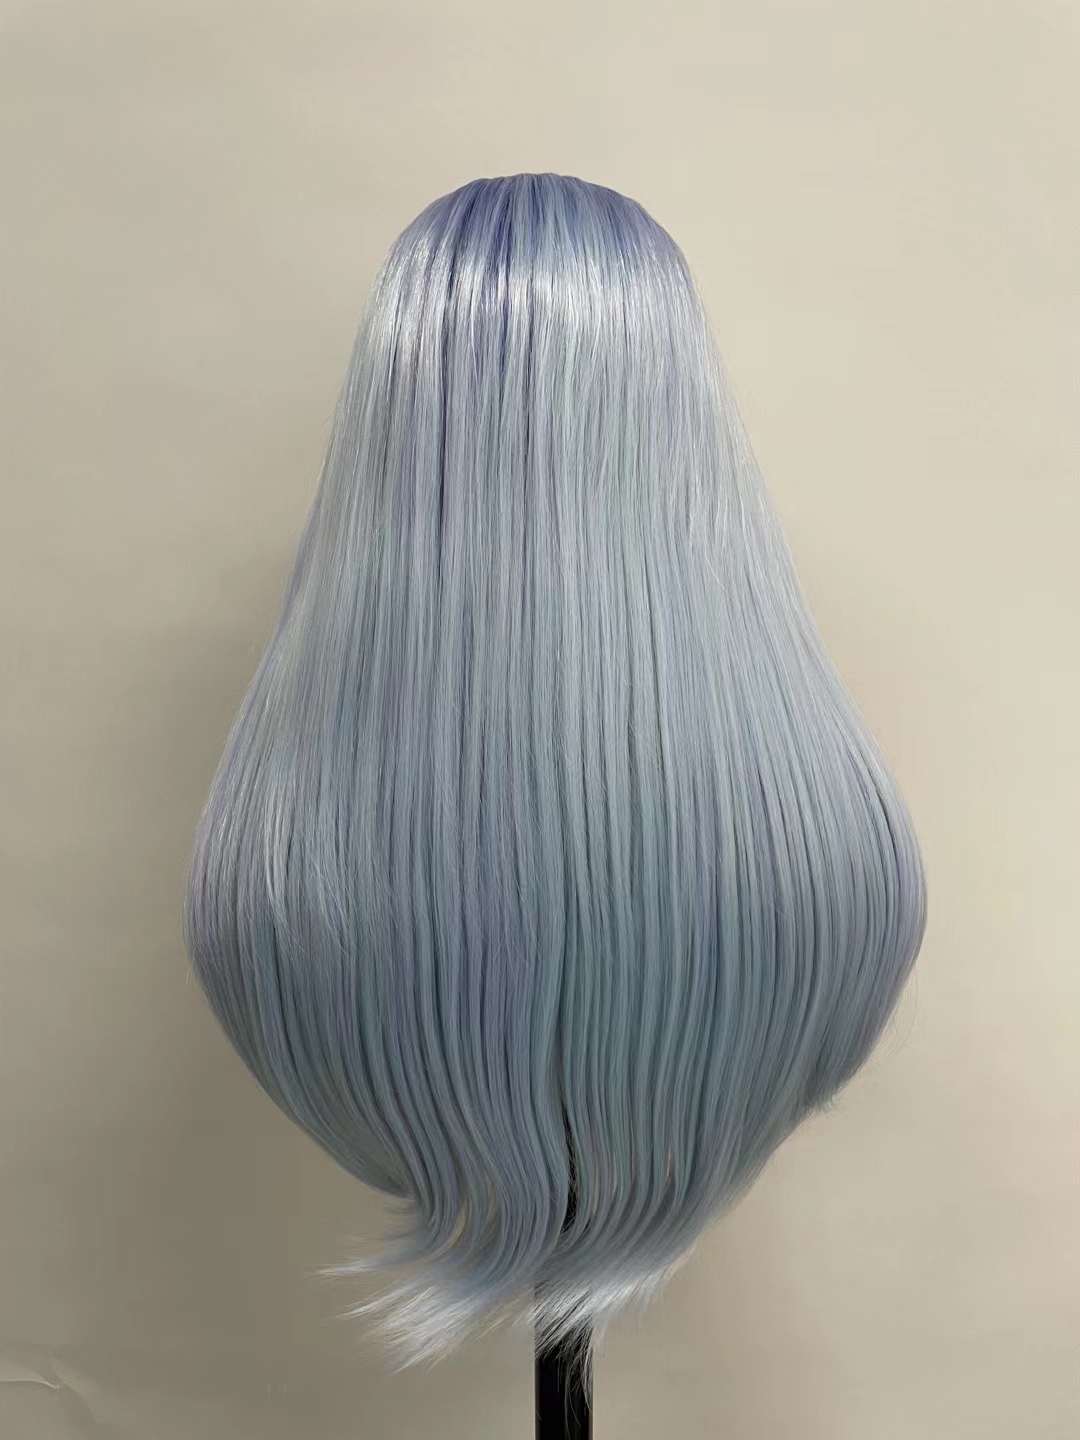 Gorgeous Special Blue Long Straight Lace Wig